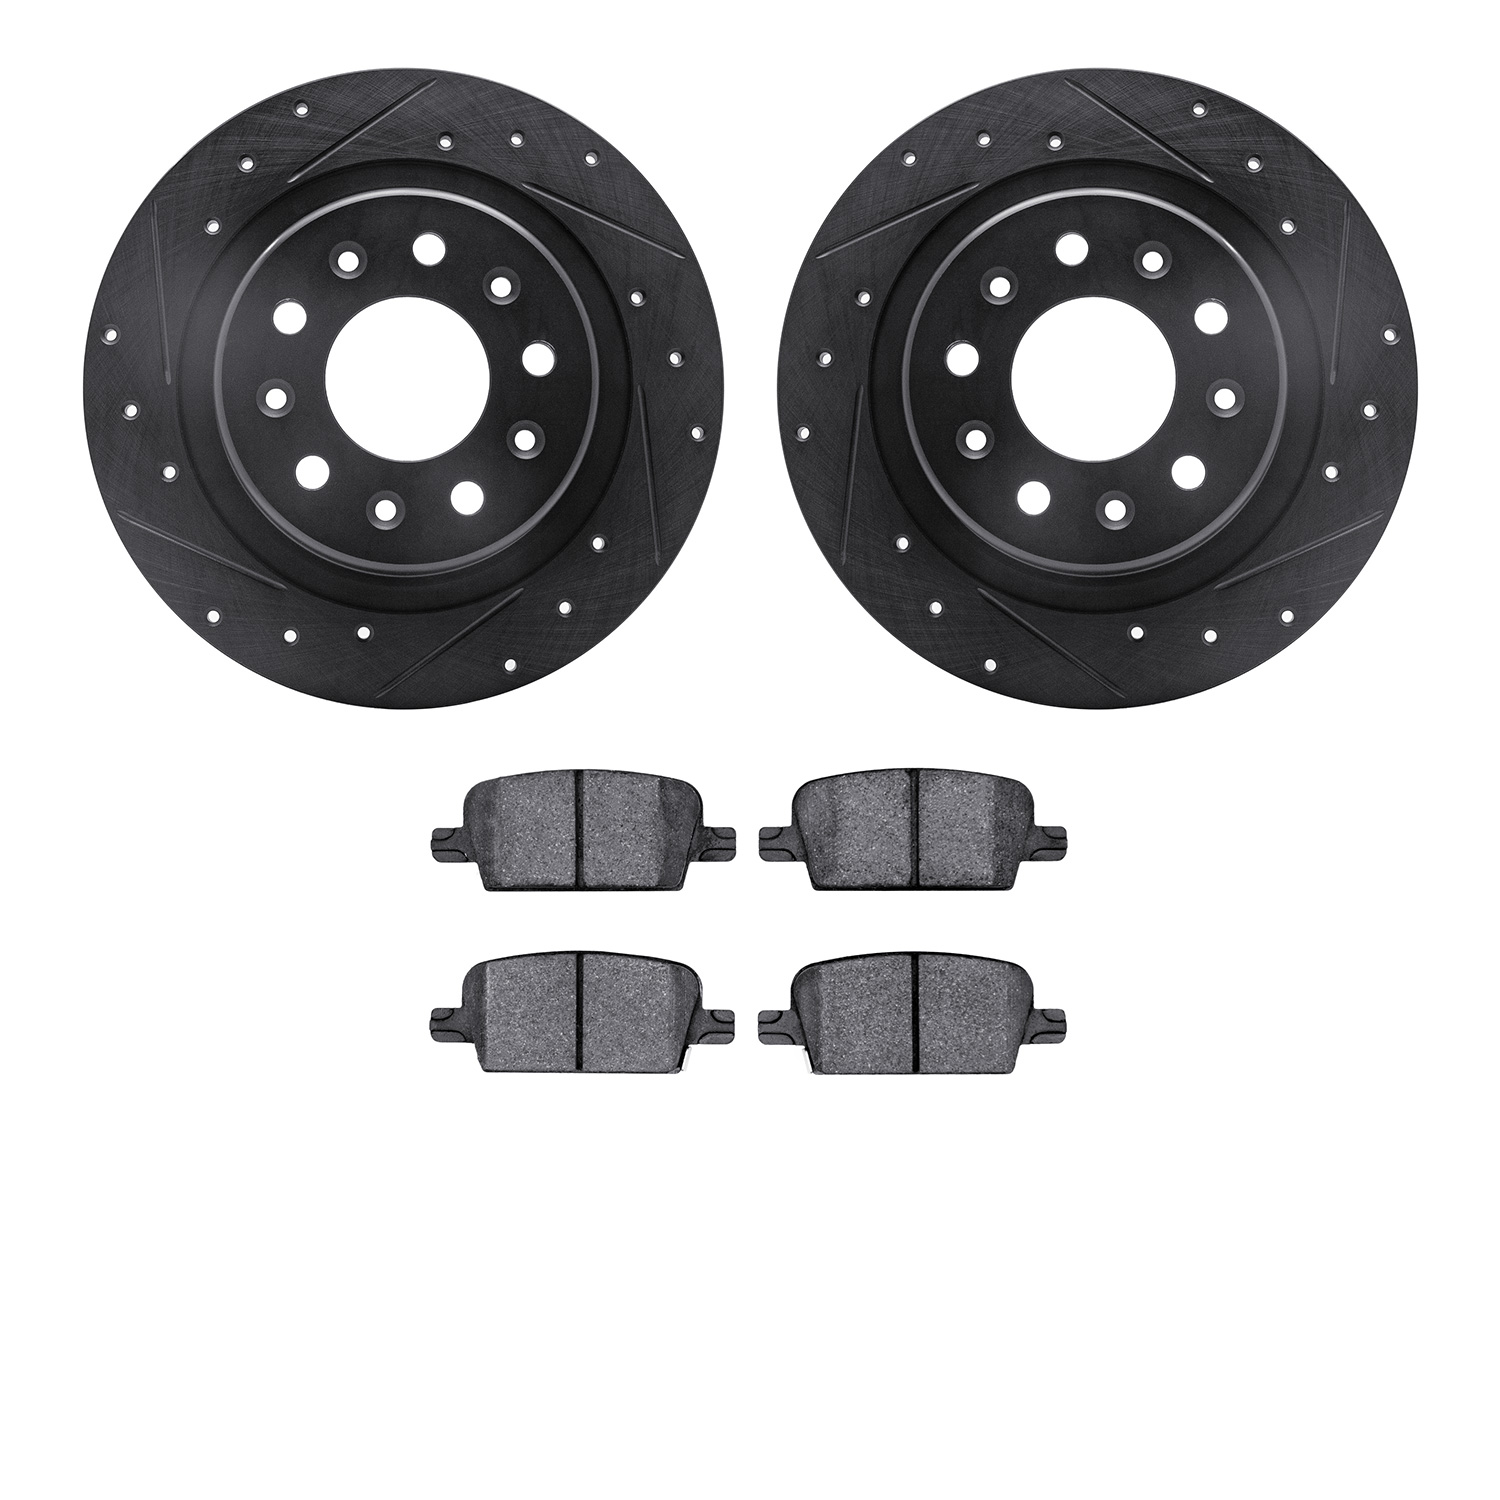 8302-47078 Drilled/Slotted Brake Rotors with 3000-Series Ceramic Brake Pads Kit [Black], Fits Select GM, Position: Rear